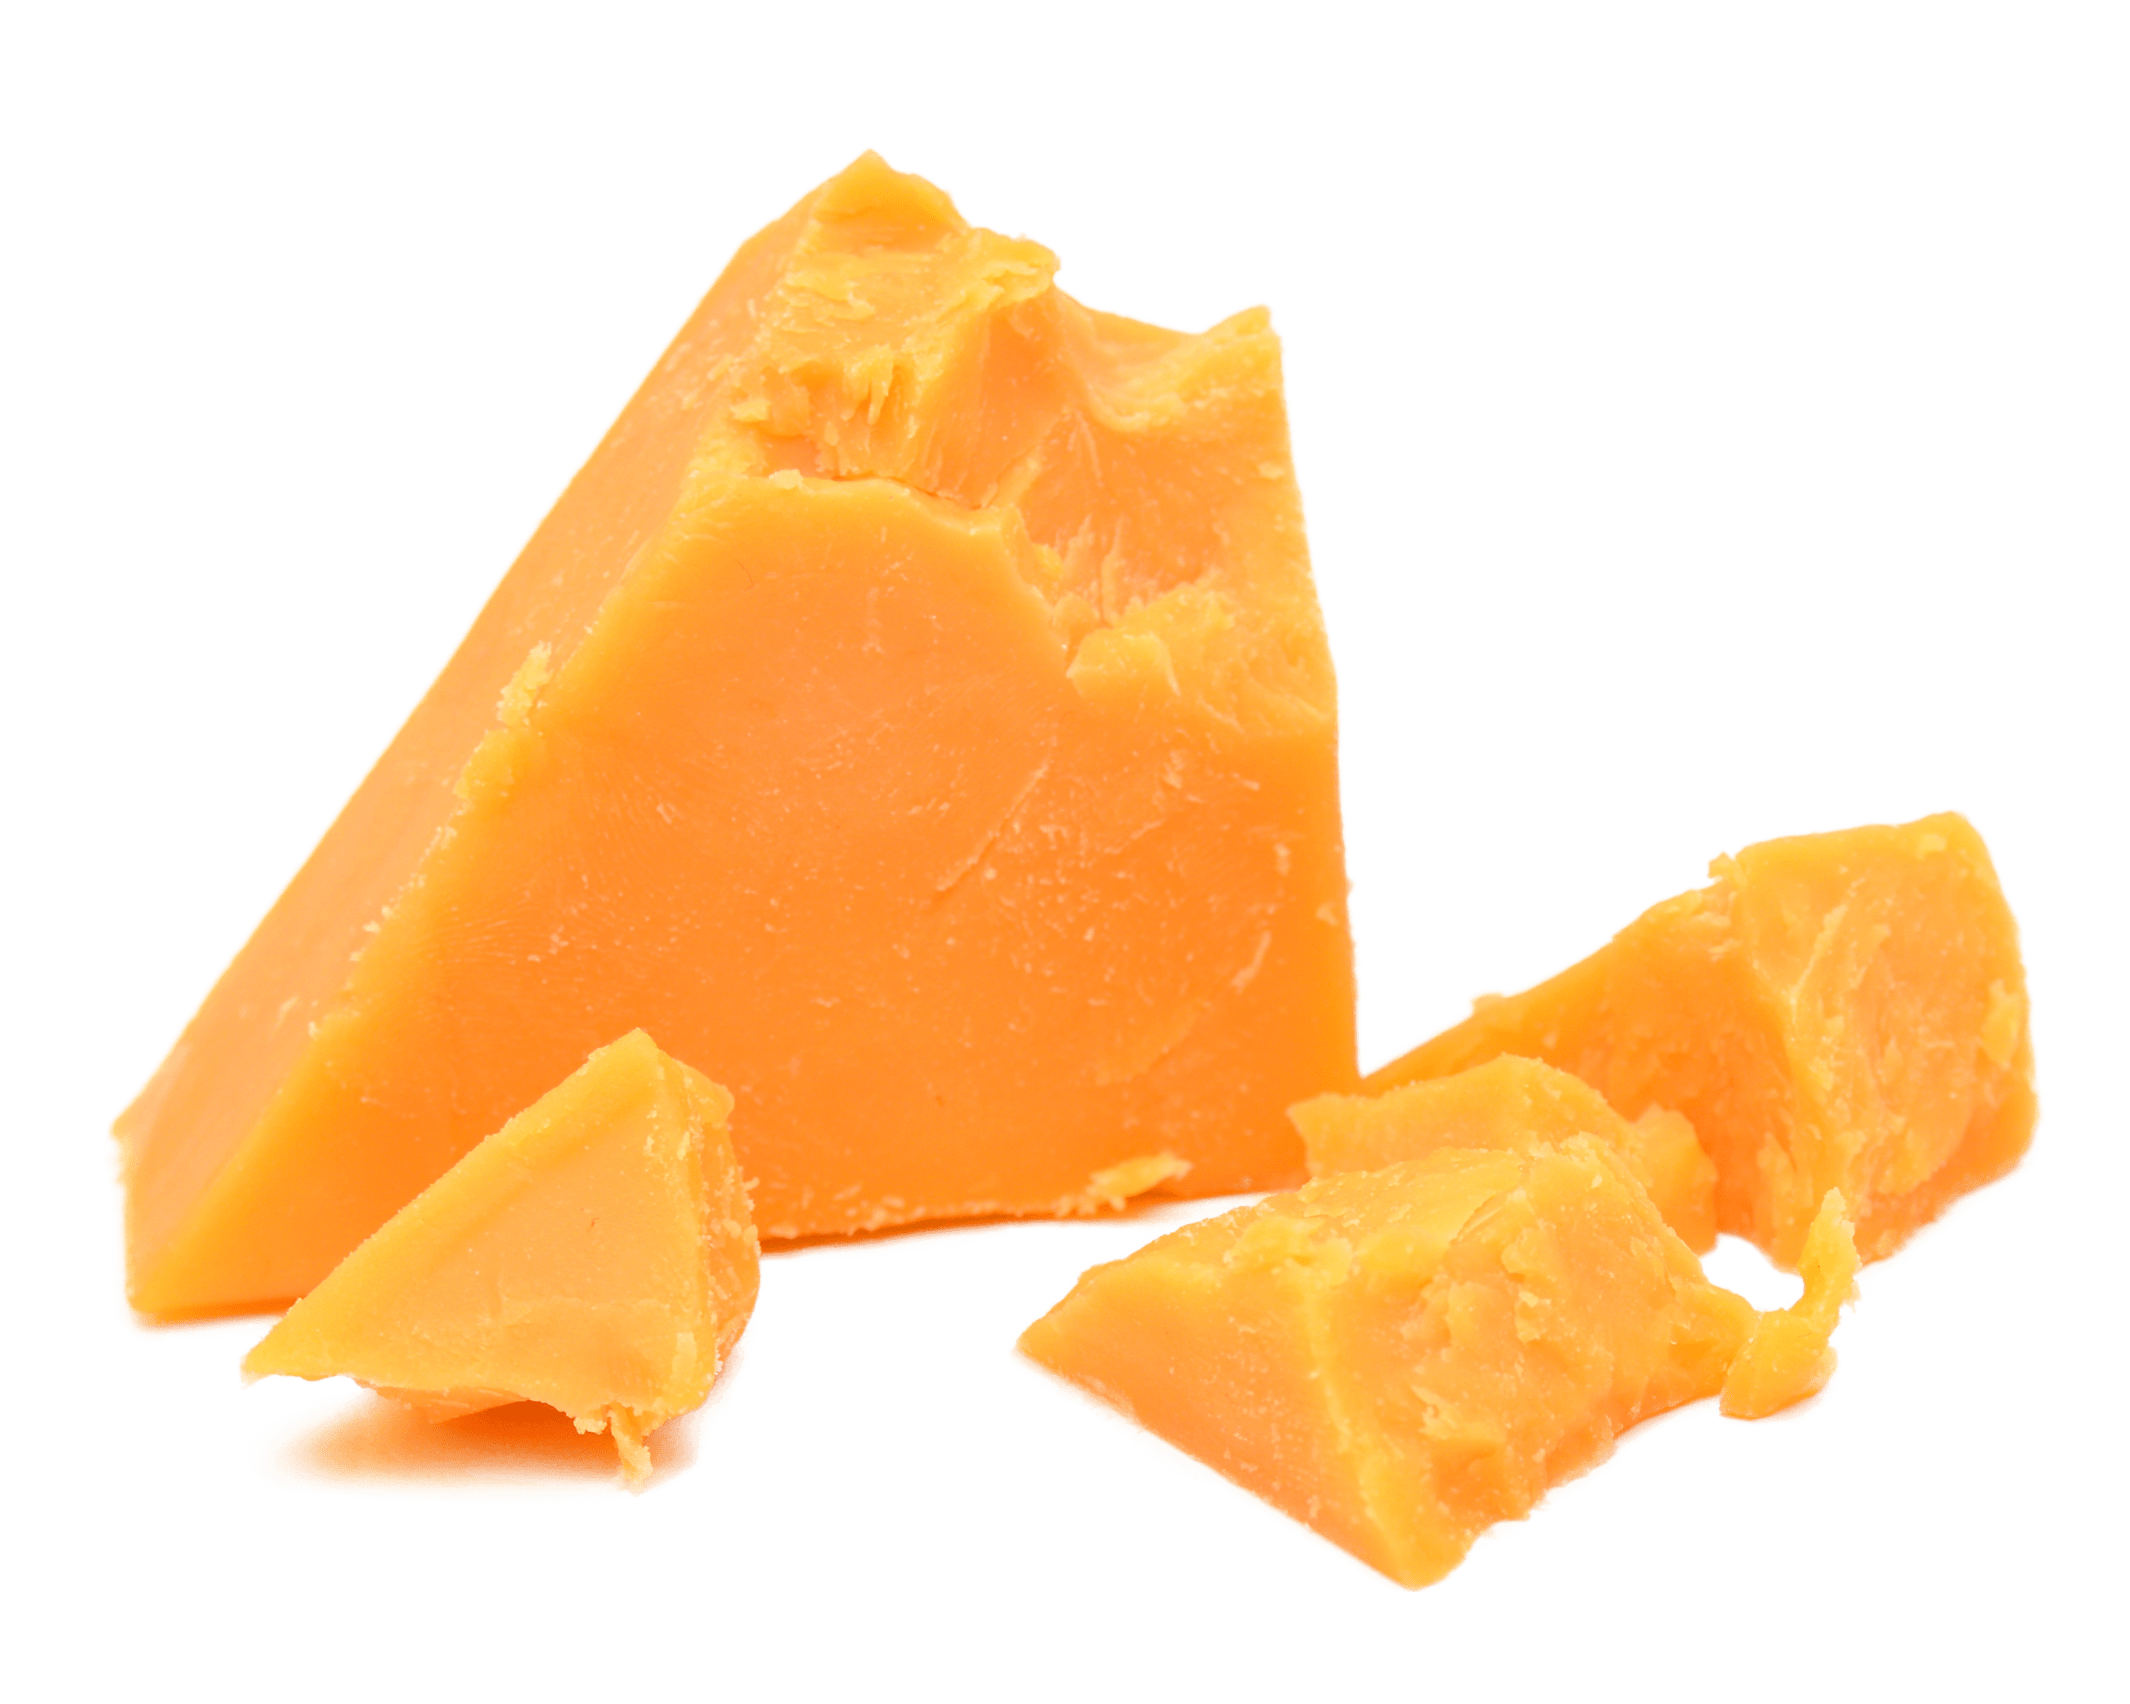 Block of cheddar cheese